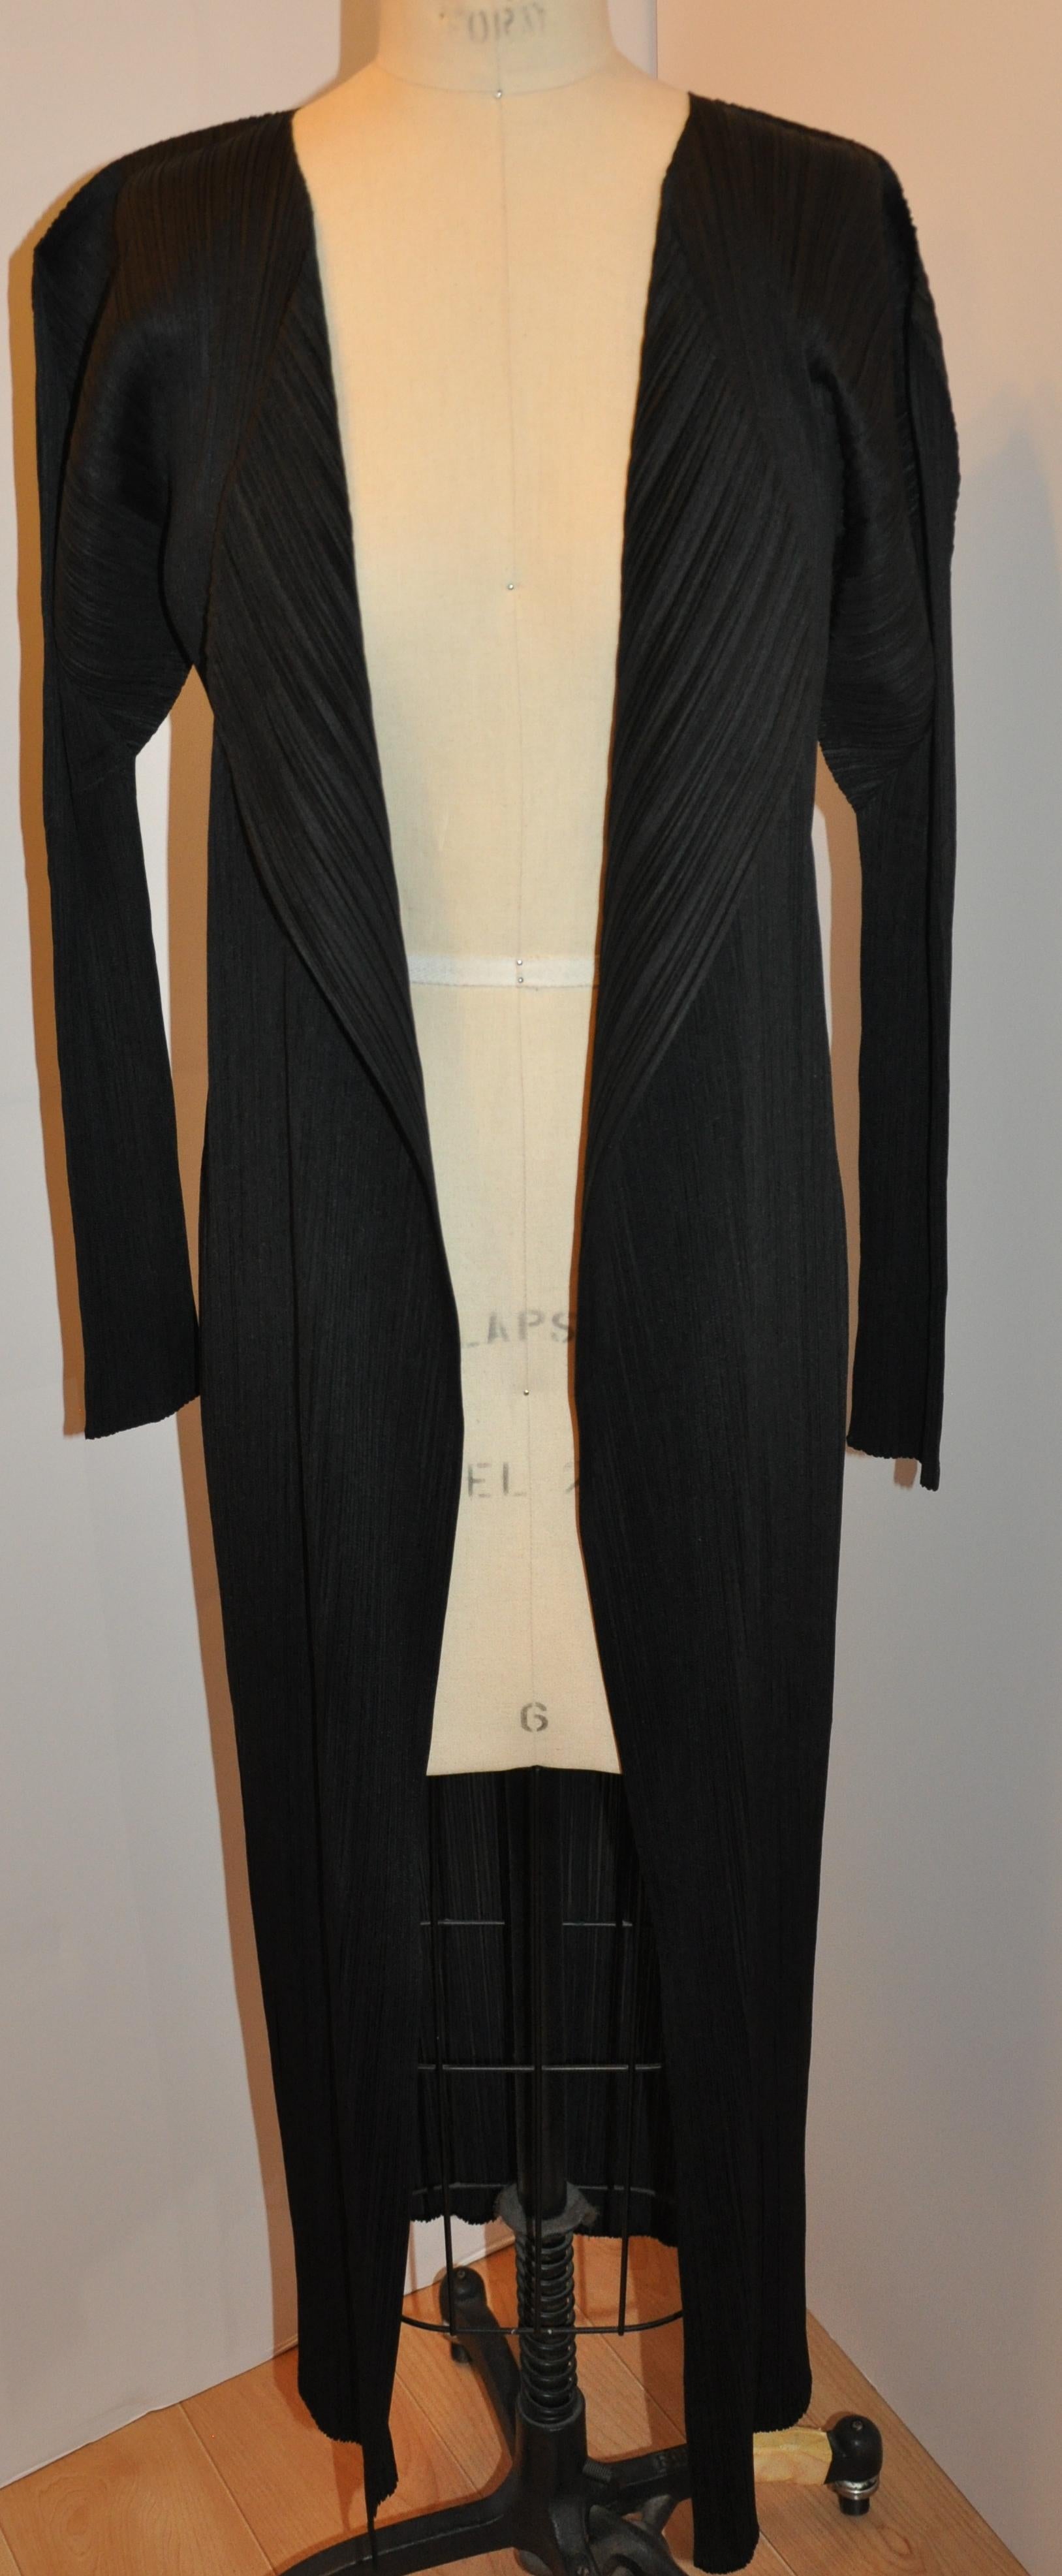        Issey Miyake signature black accordian open coat measures 50 inches in total length. Shoulders are 22 inches across, sleeve is 22 inches in length, neck-to-shoulders are 6 inches. Size is 4/taille, made in Japan.